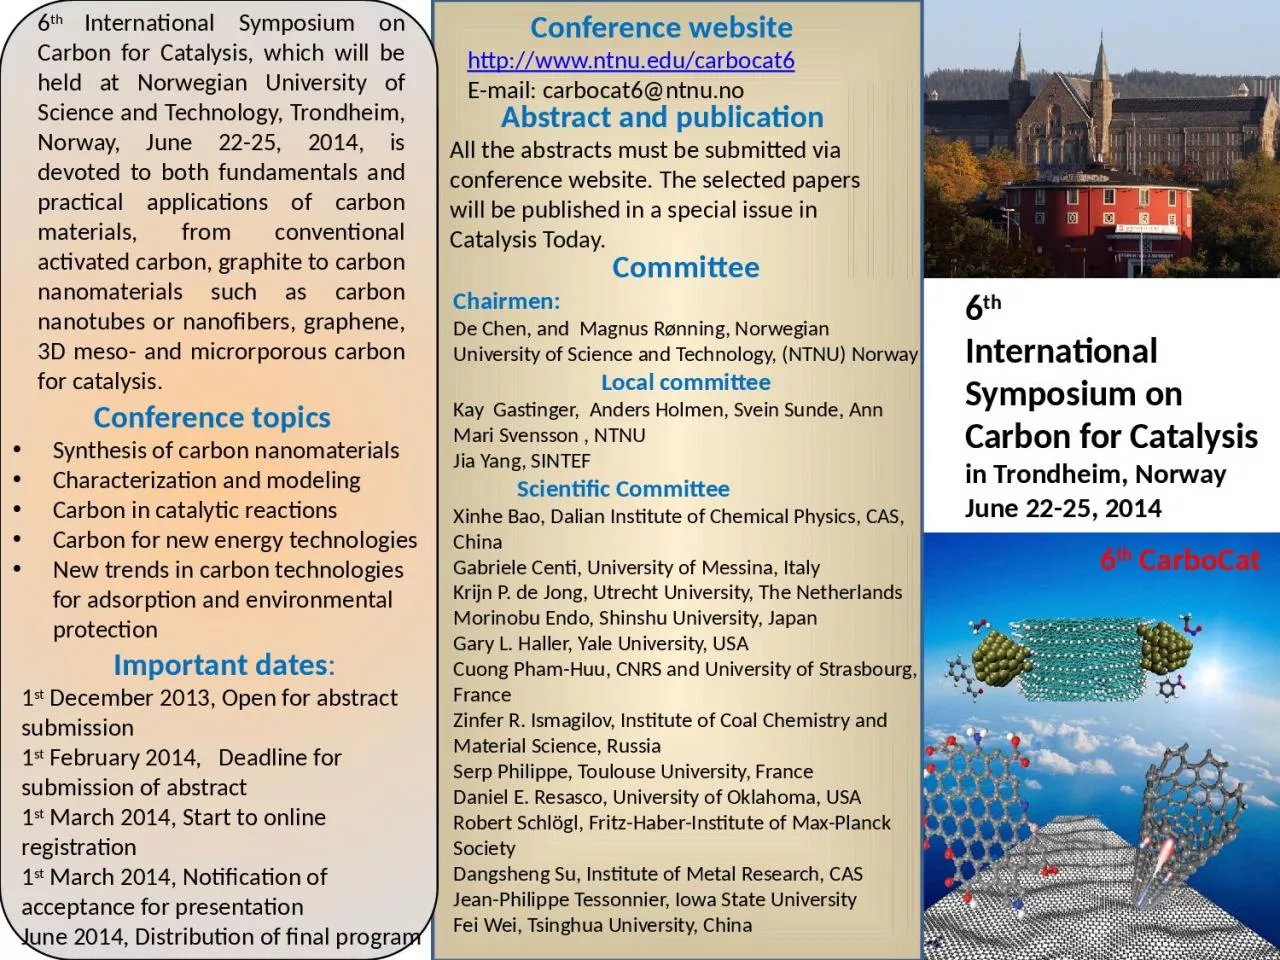 6 th  International Symposium on Carbon for Catalysis, which will be held at Norwegian